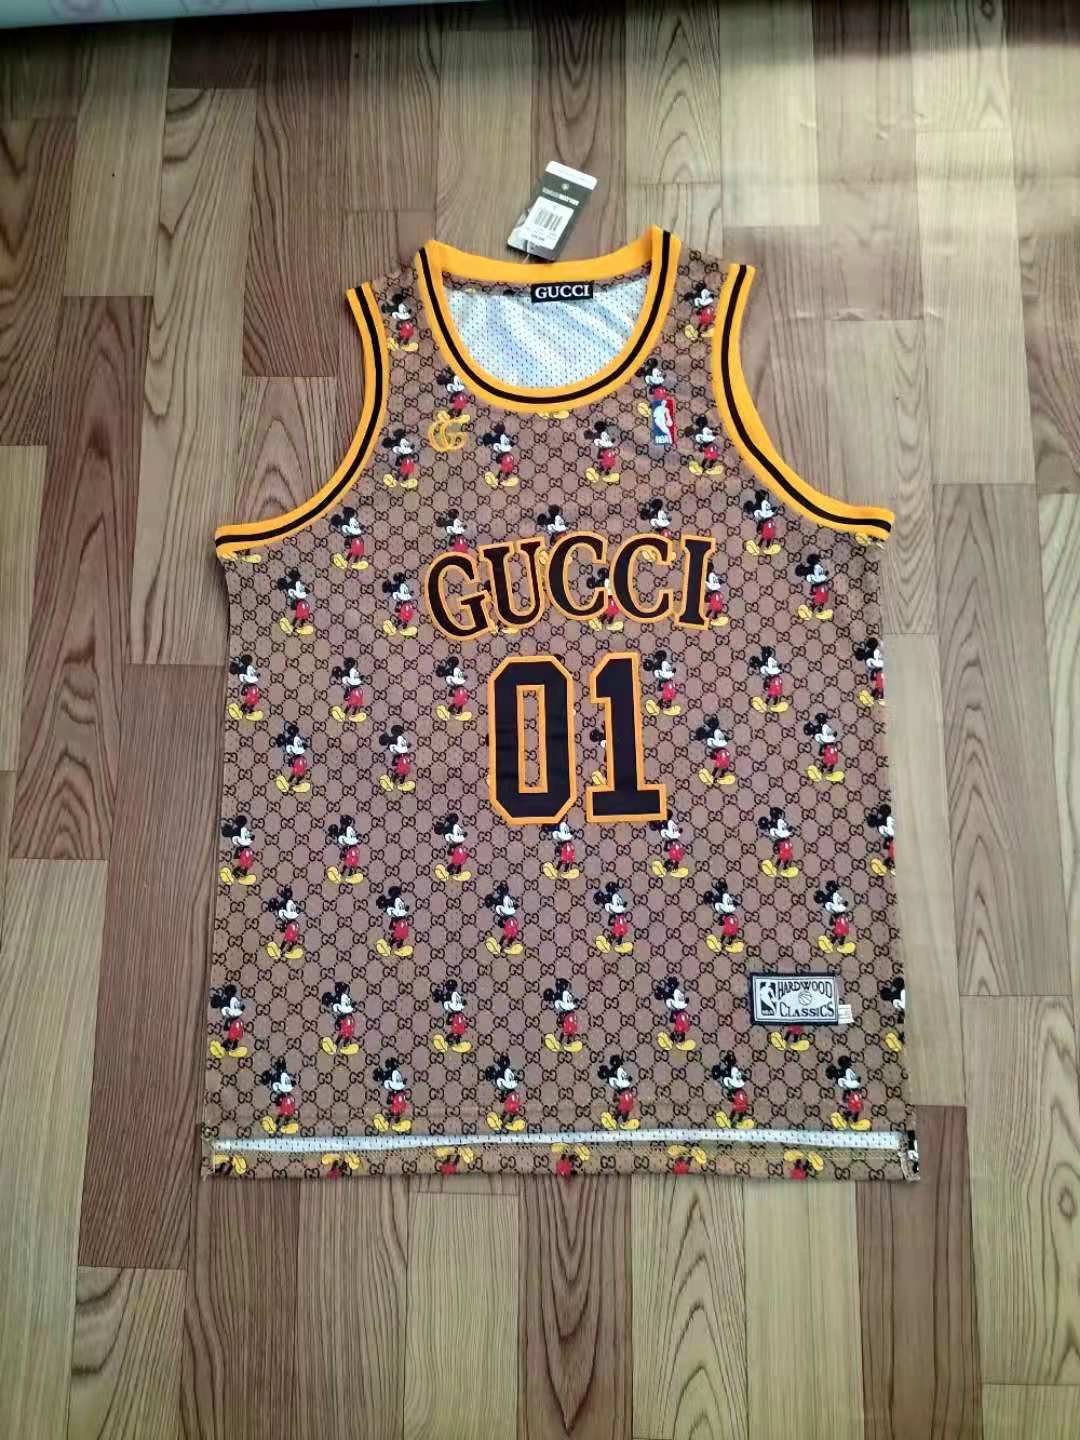 Men's GUCCI #01 NUMBER Mickey Mouse Basketball Jersey Coffee